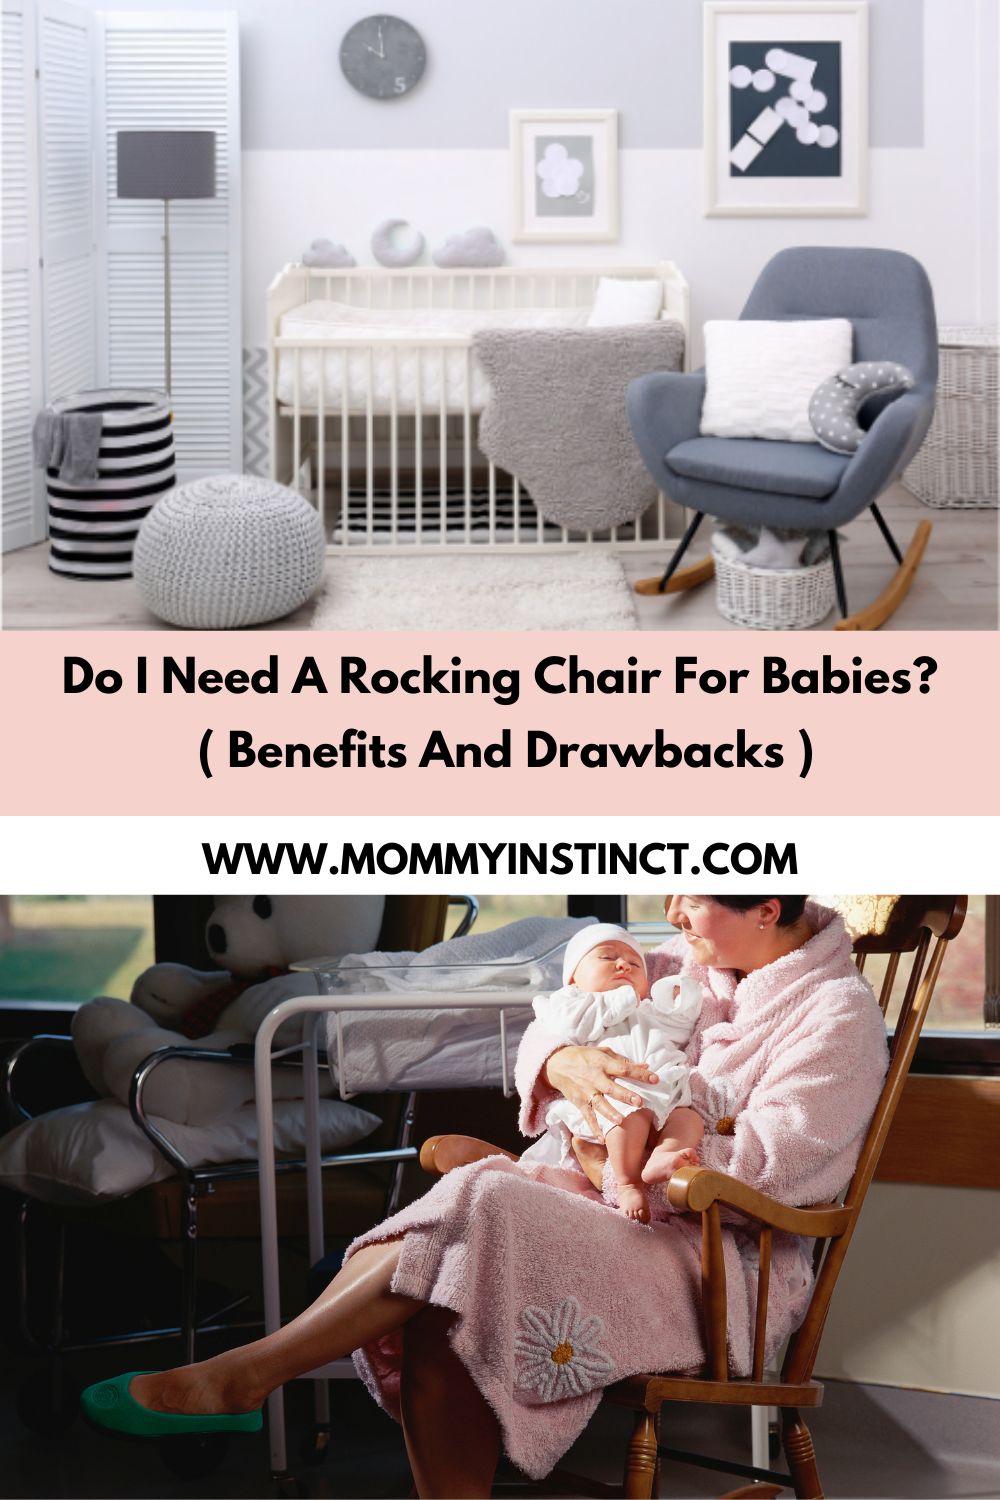 Do I Need A Rocking Chair For Babies